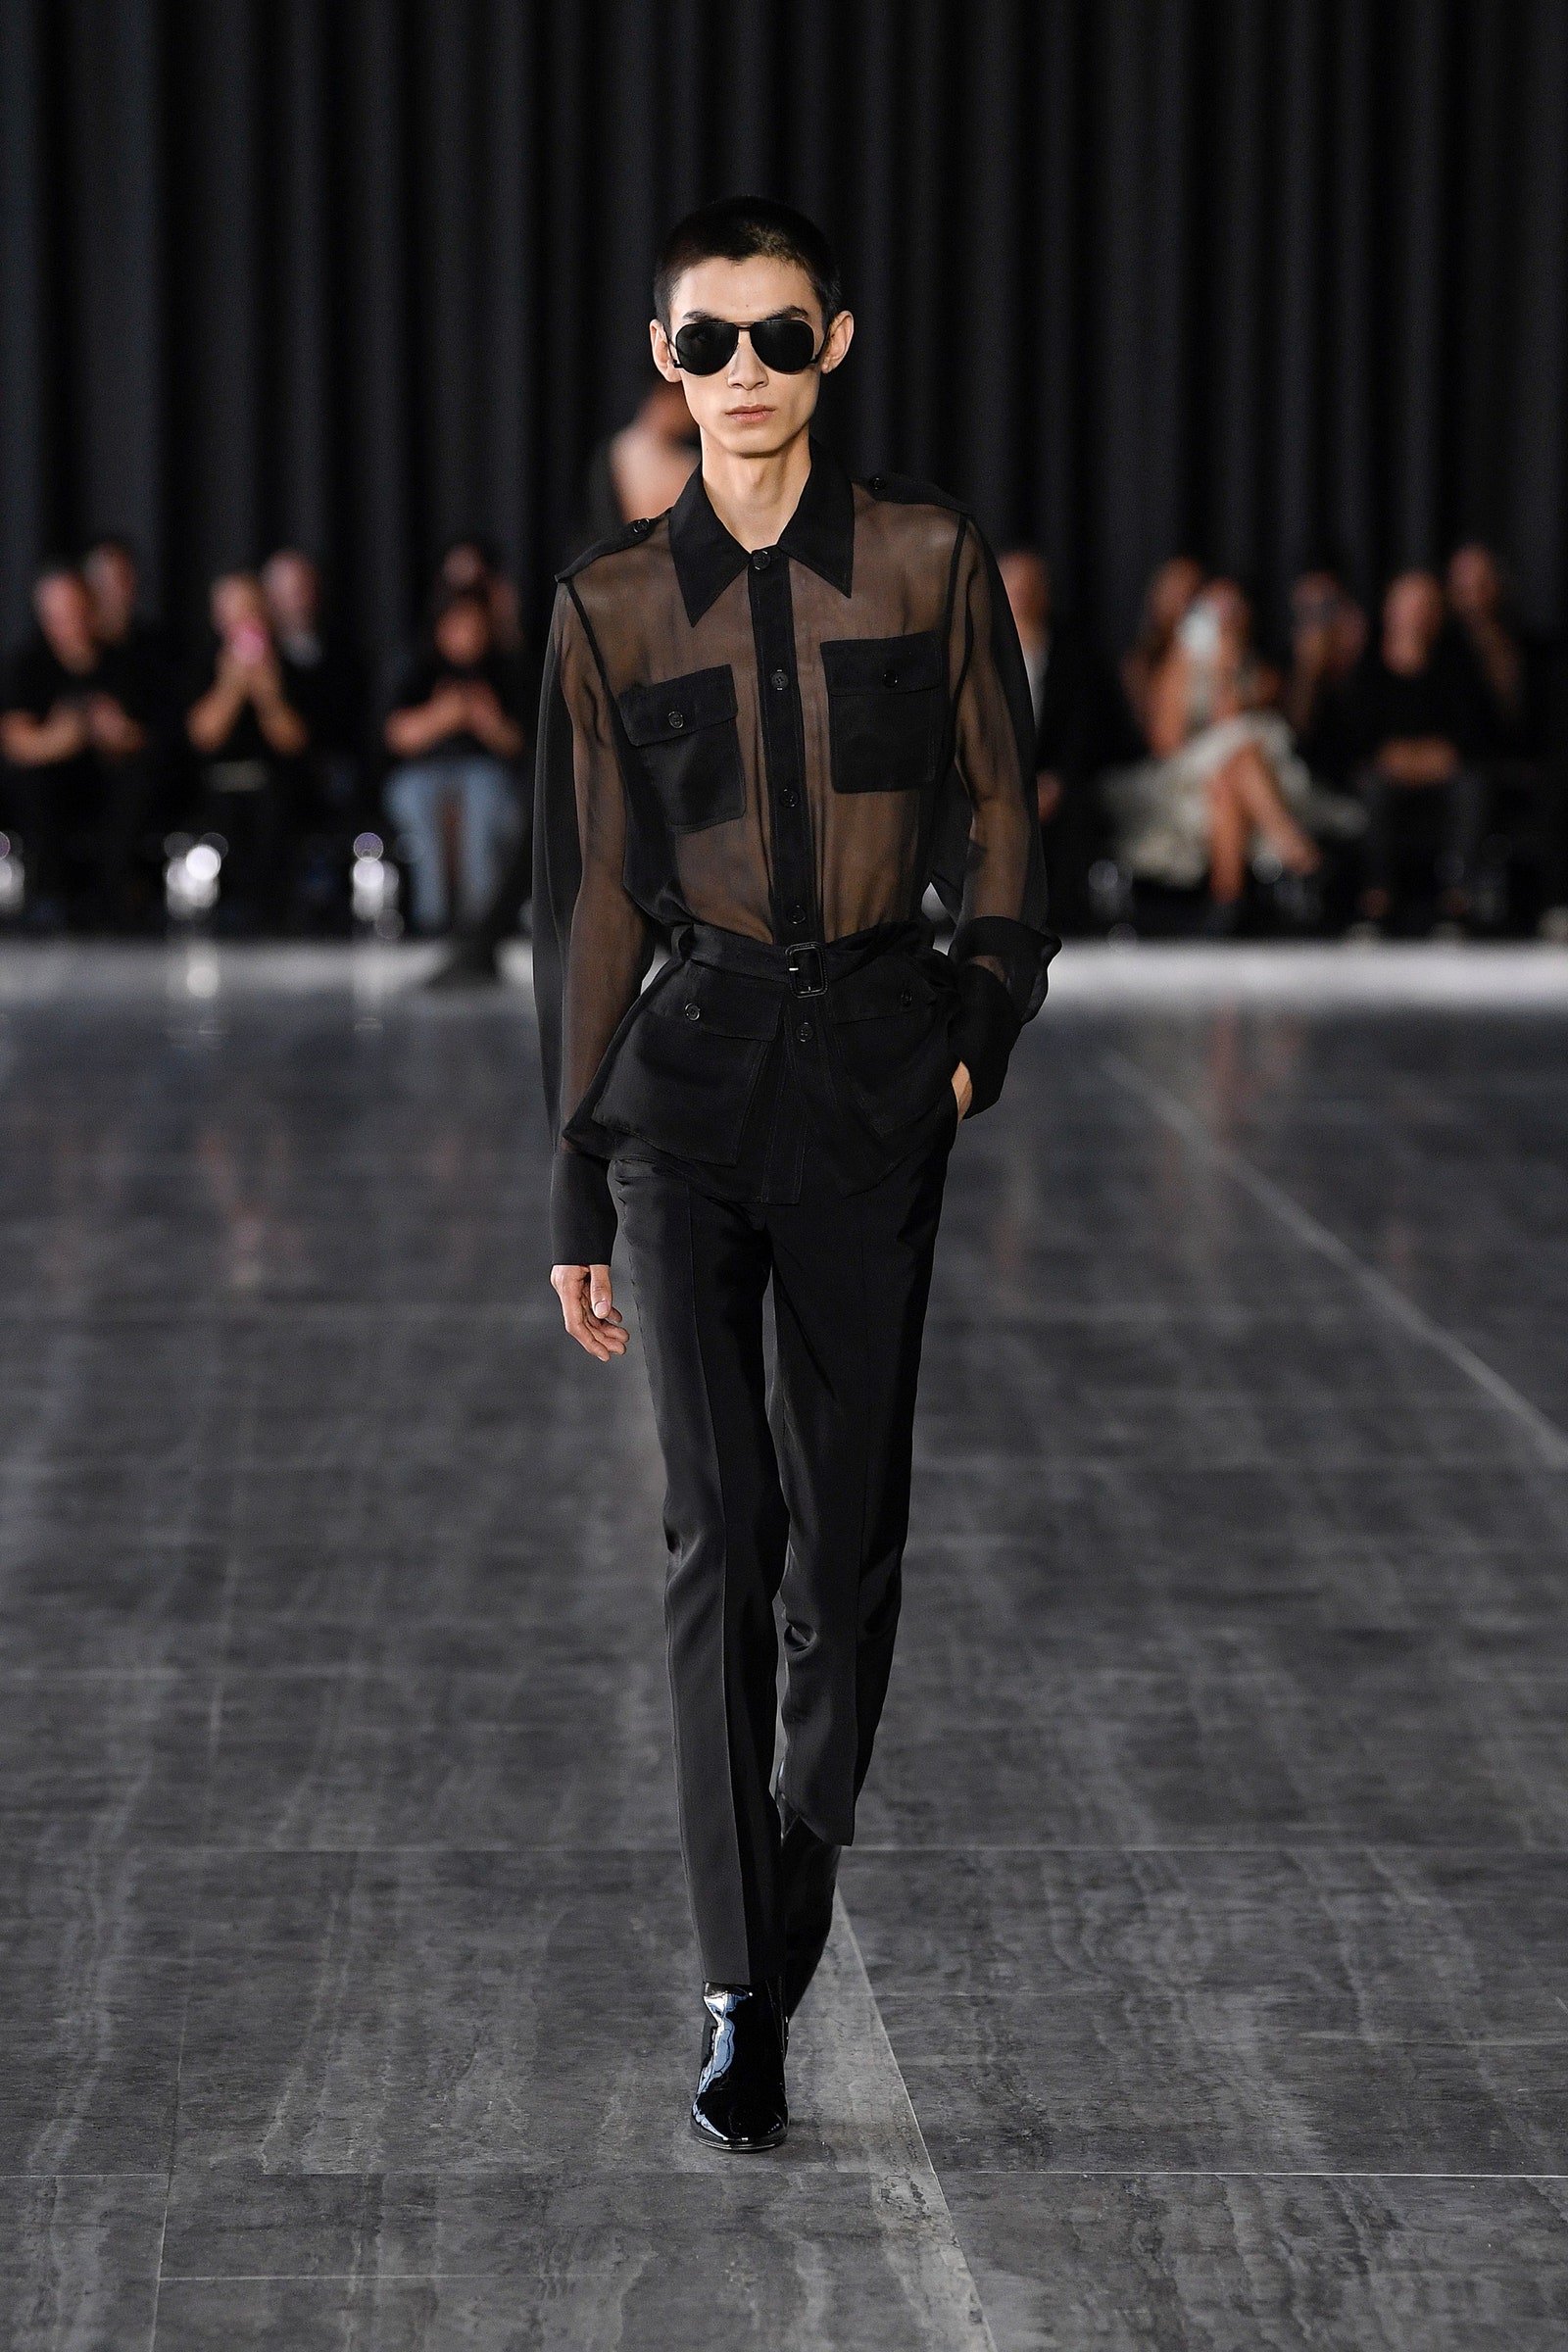 Saint Laurent by Anthony Vaccarello